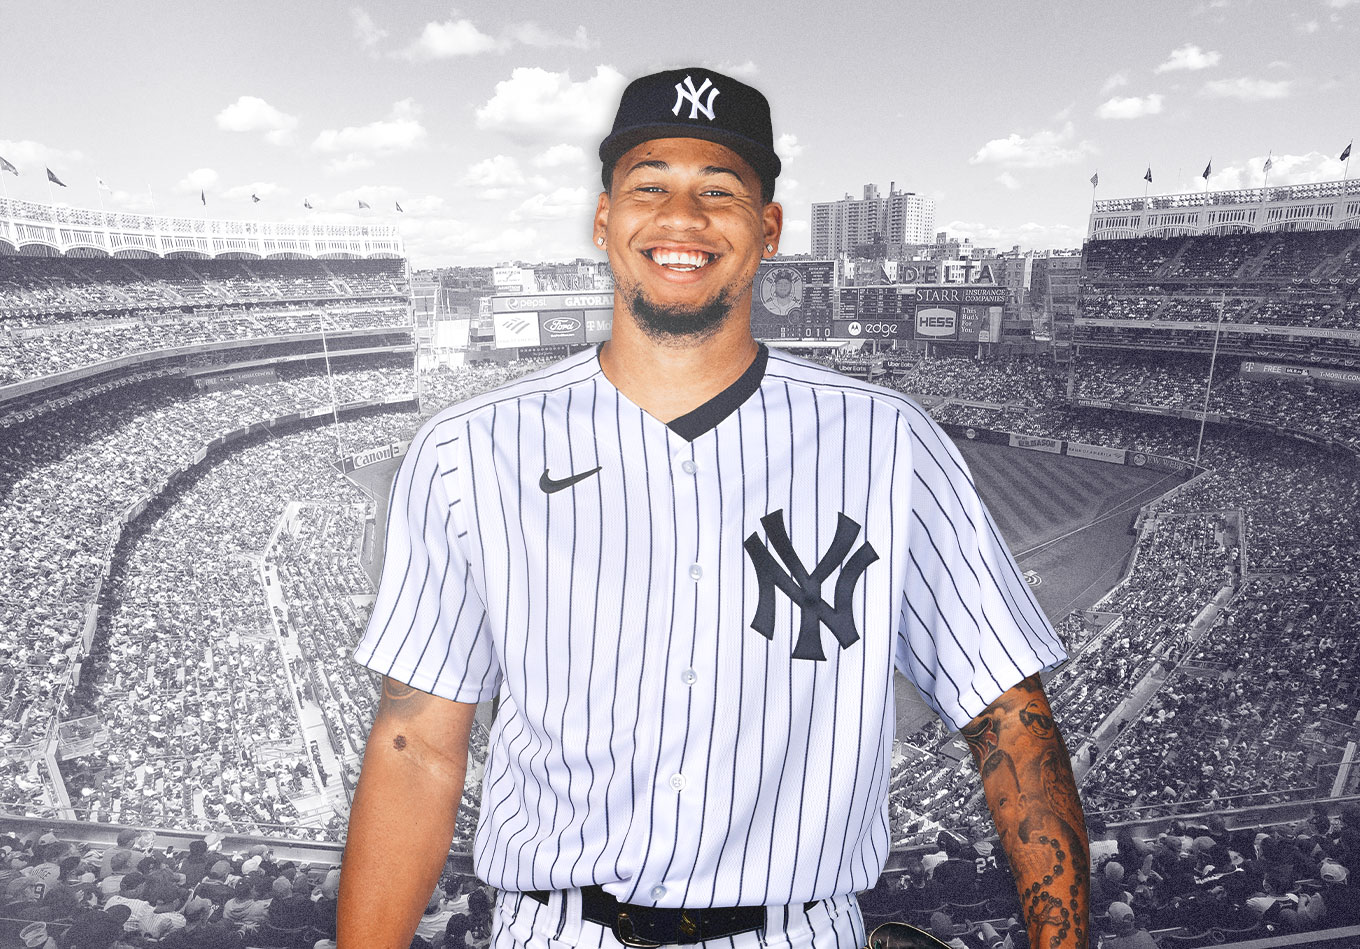 Inside Frankie Montas’ Arsenal and What Makes Him the Yankees’ Biggest Deadline Prize